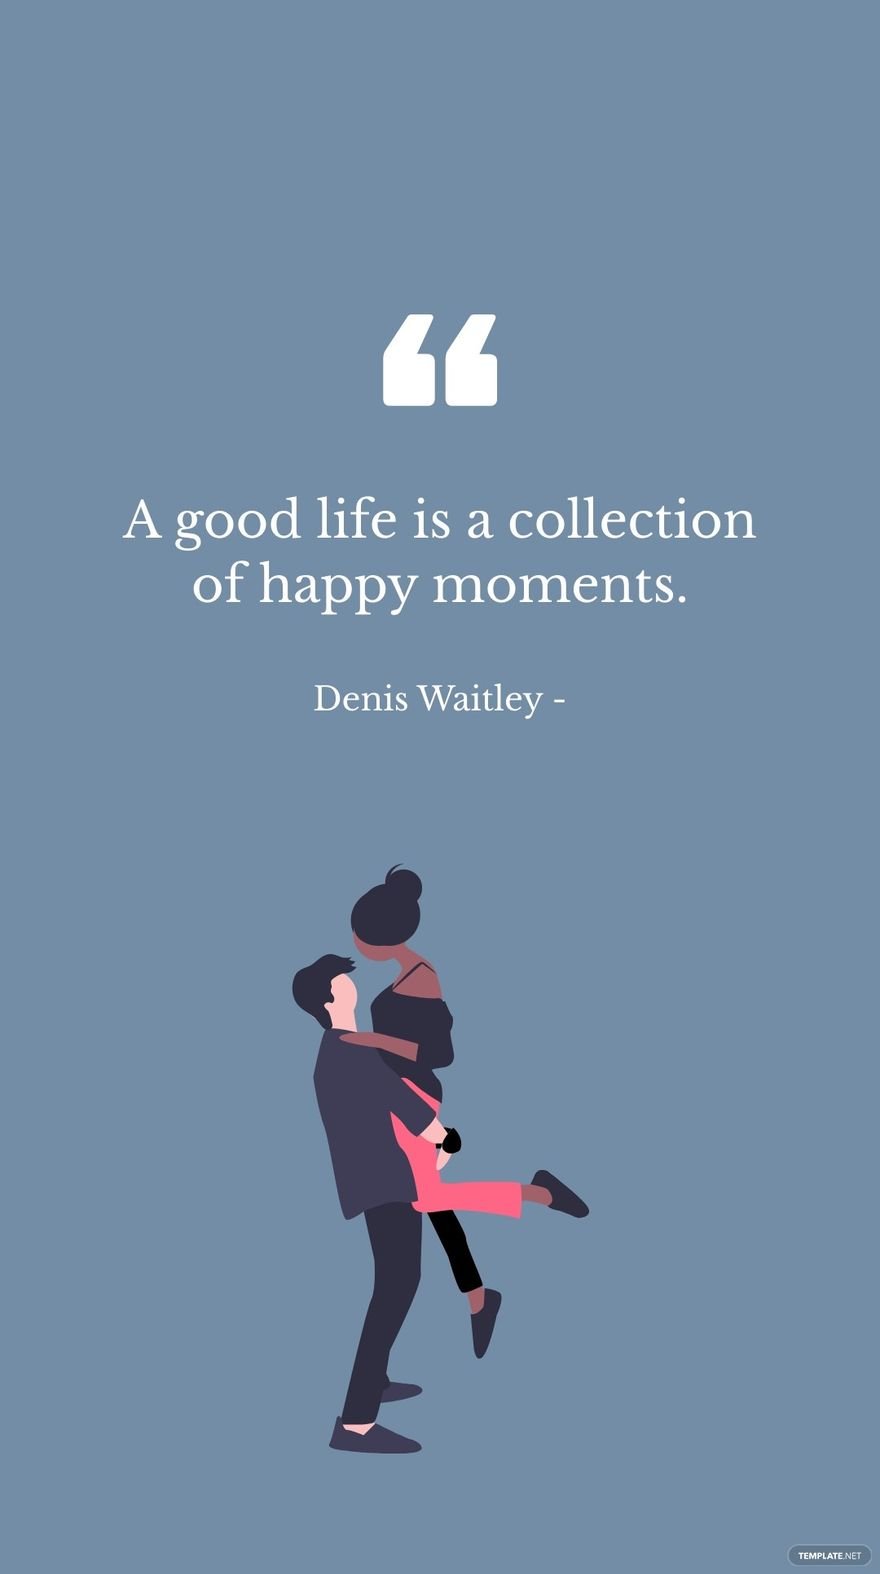 Denis Waitley - A good life is a collection of happy moments.